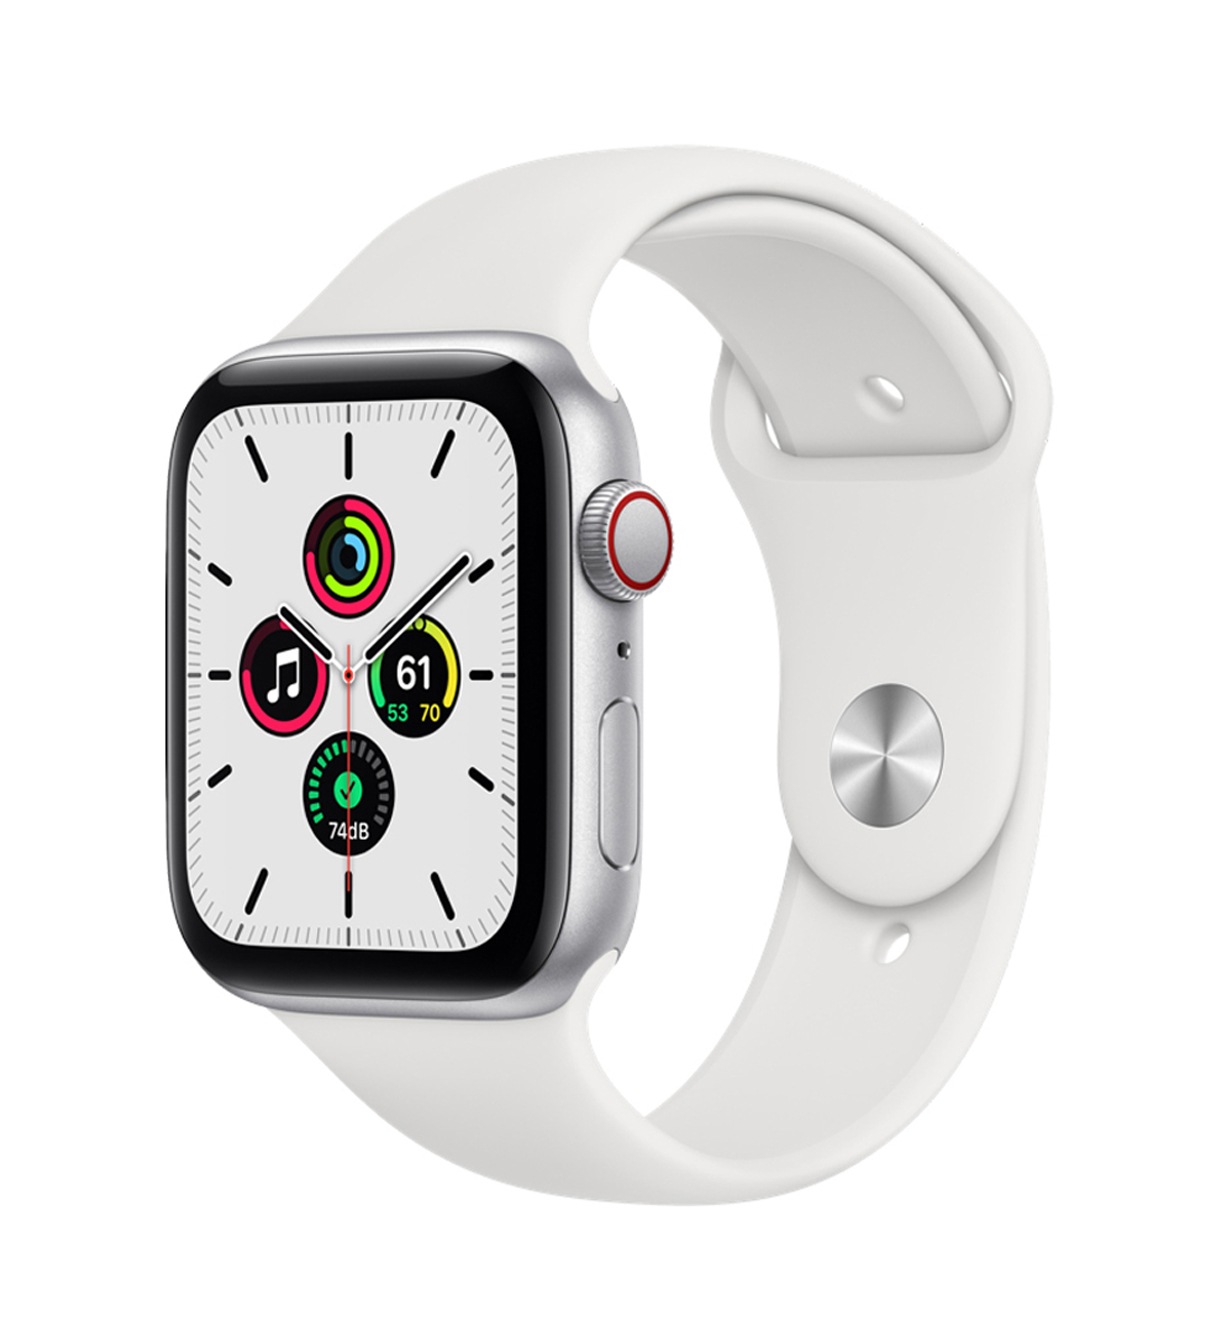 series 4 apple watch without cellular